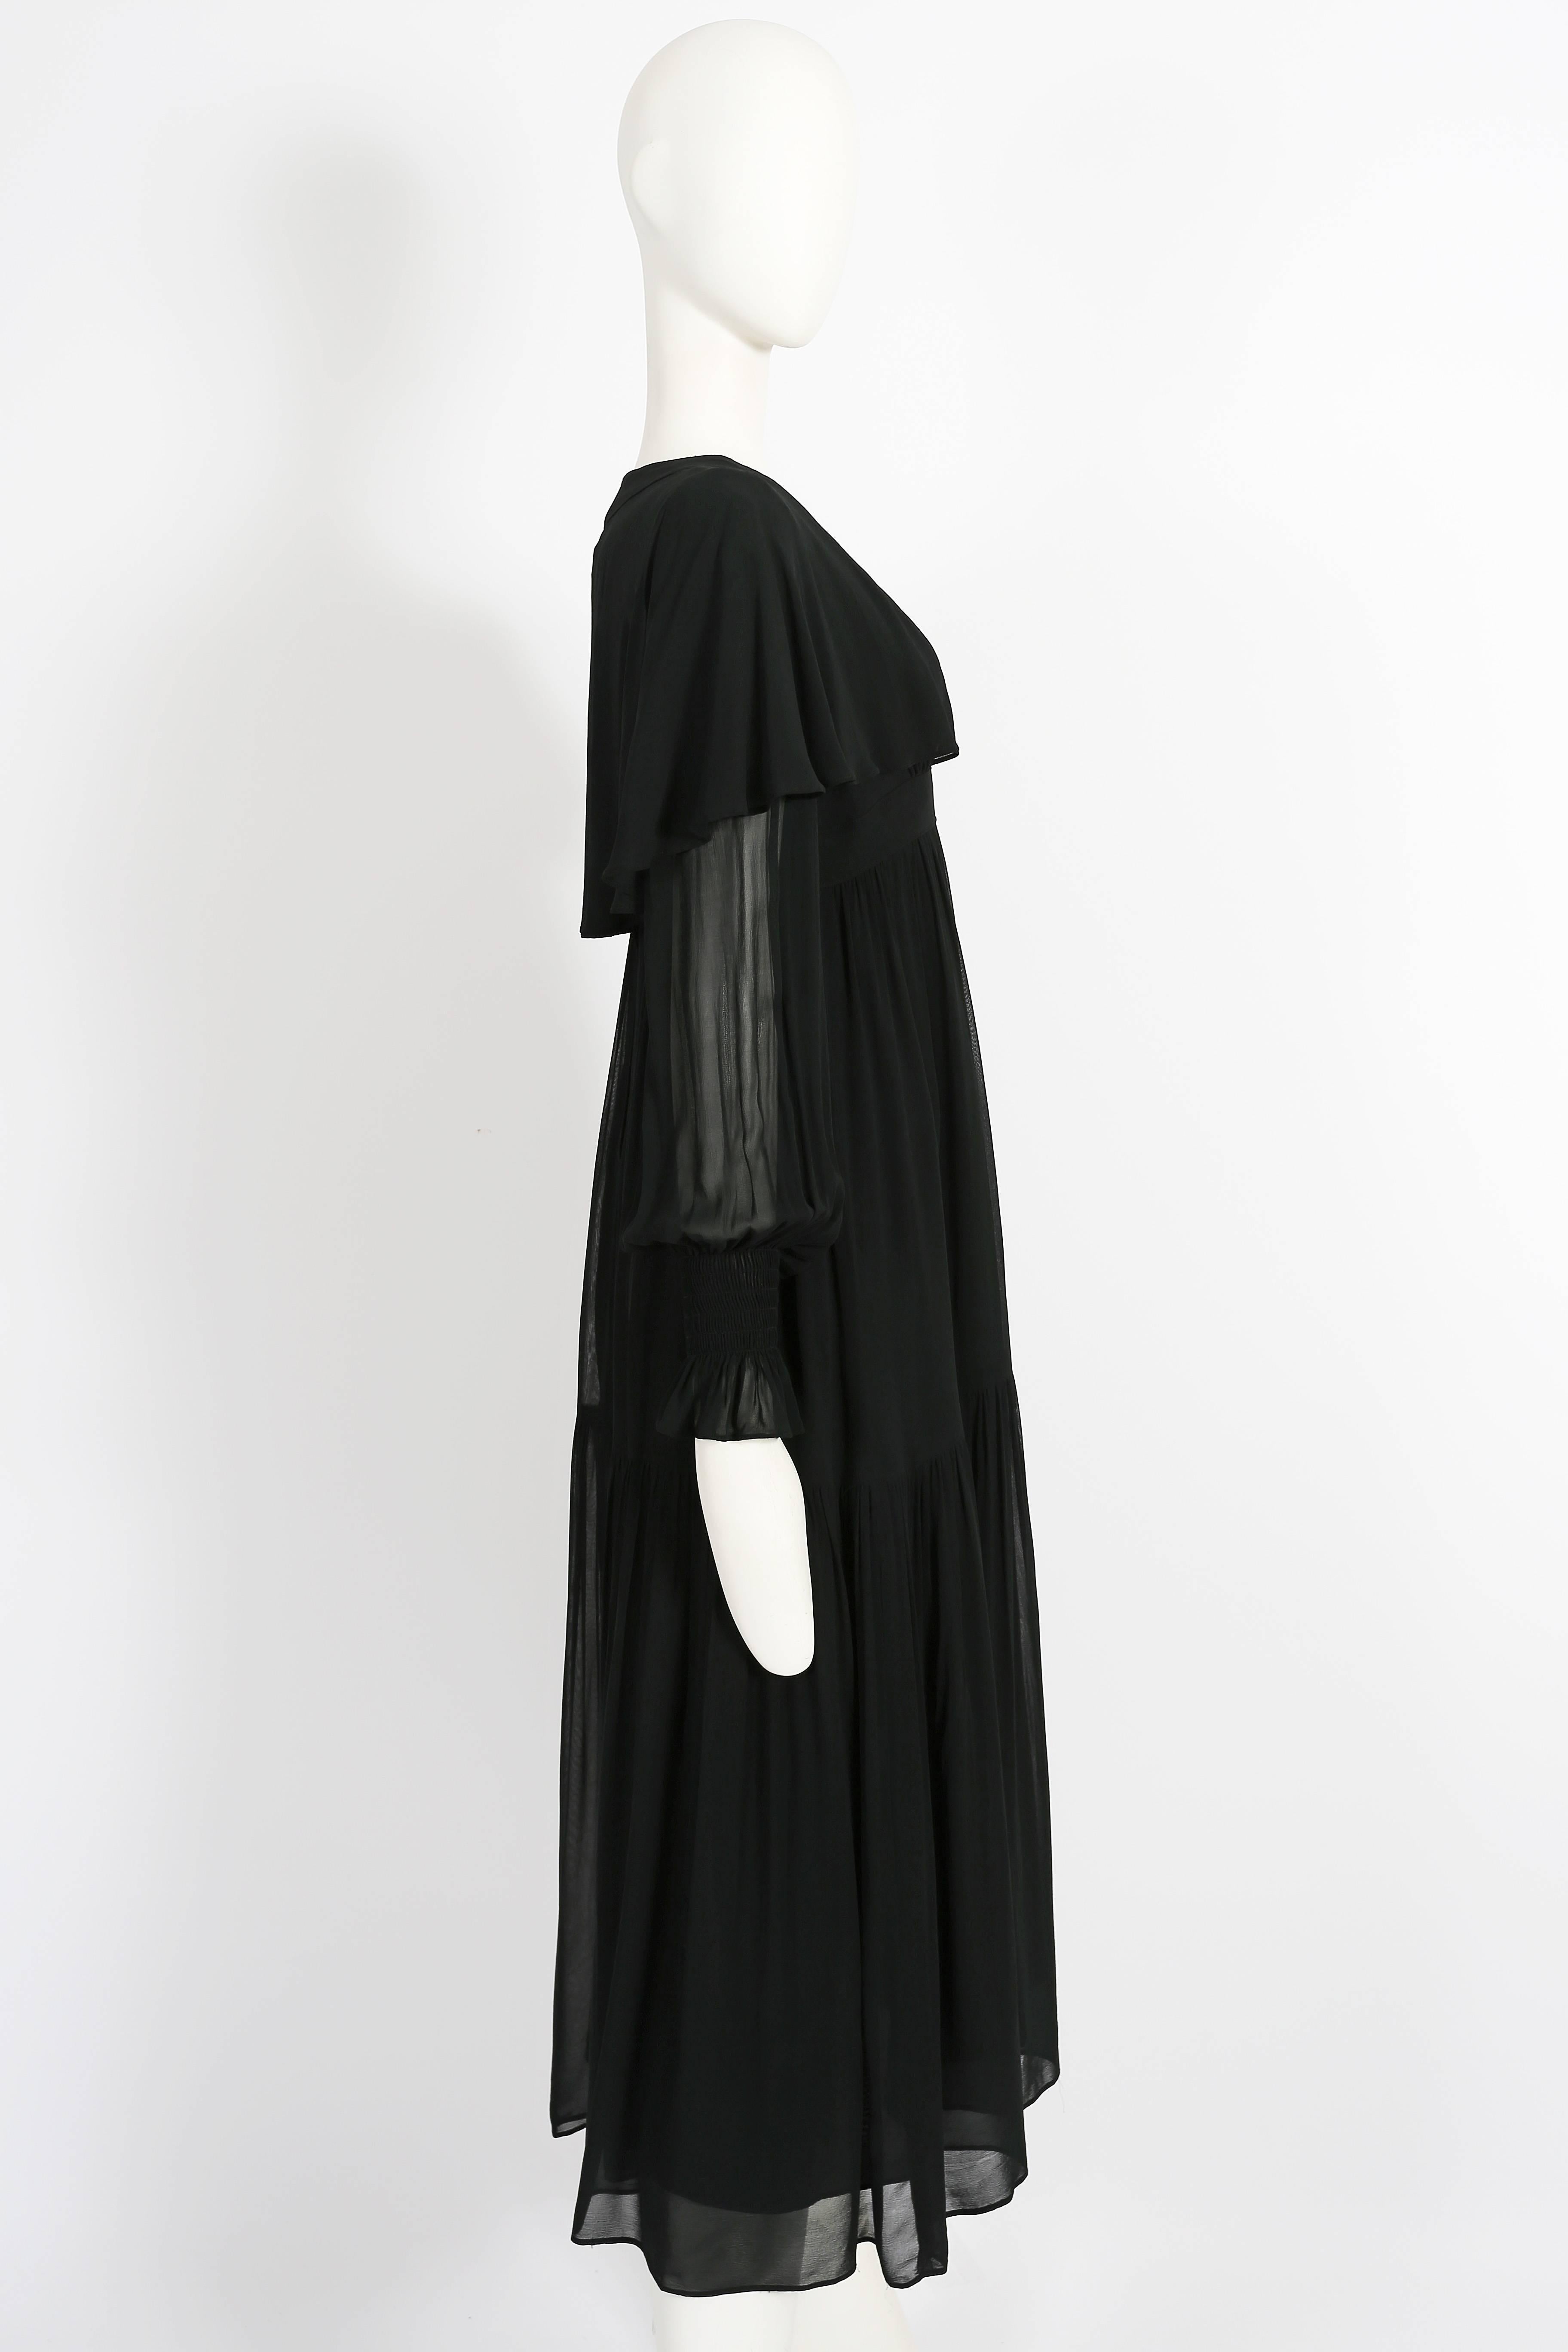 Ossie Clark black chiffon tiered evening dress with capelet, circa 1972 2